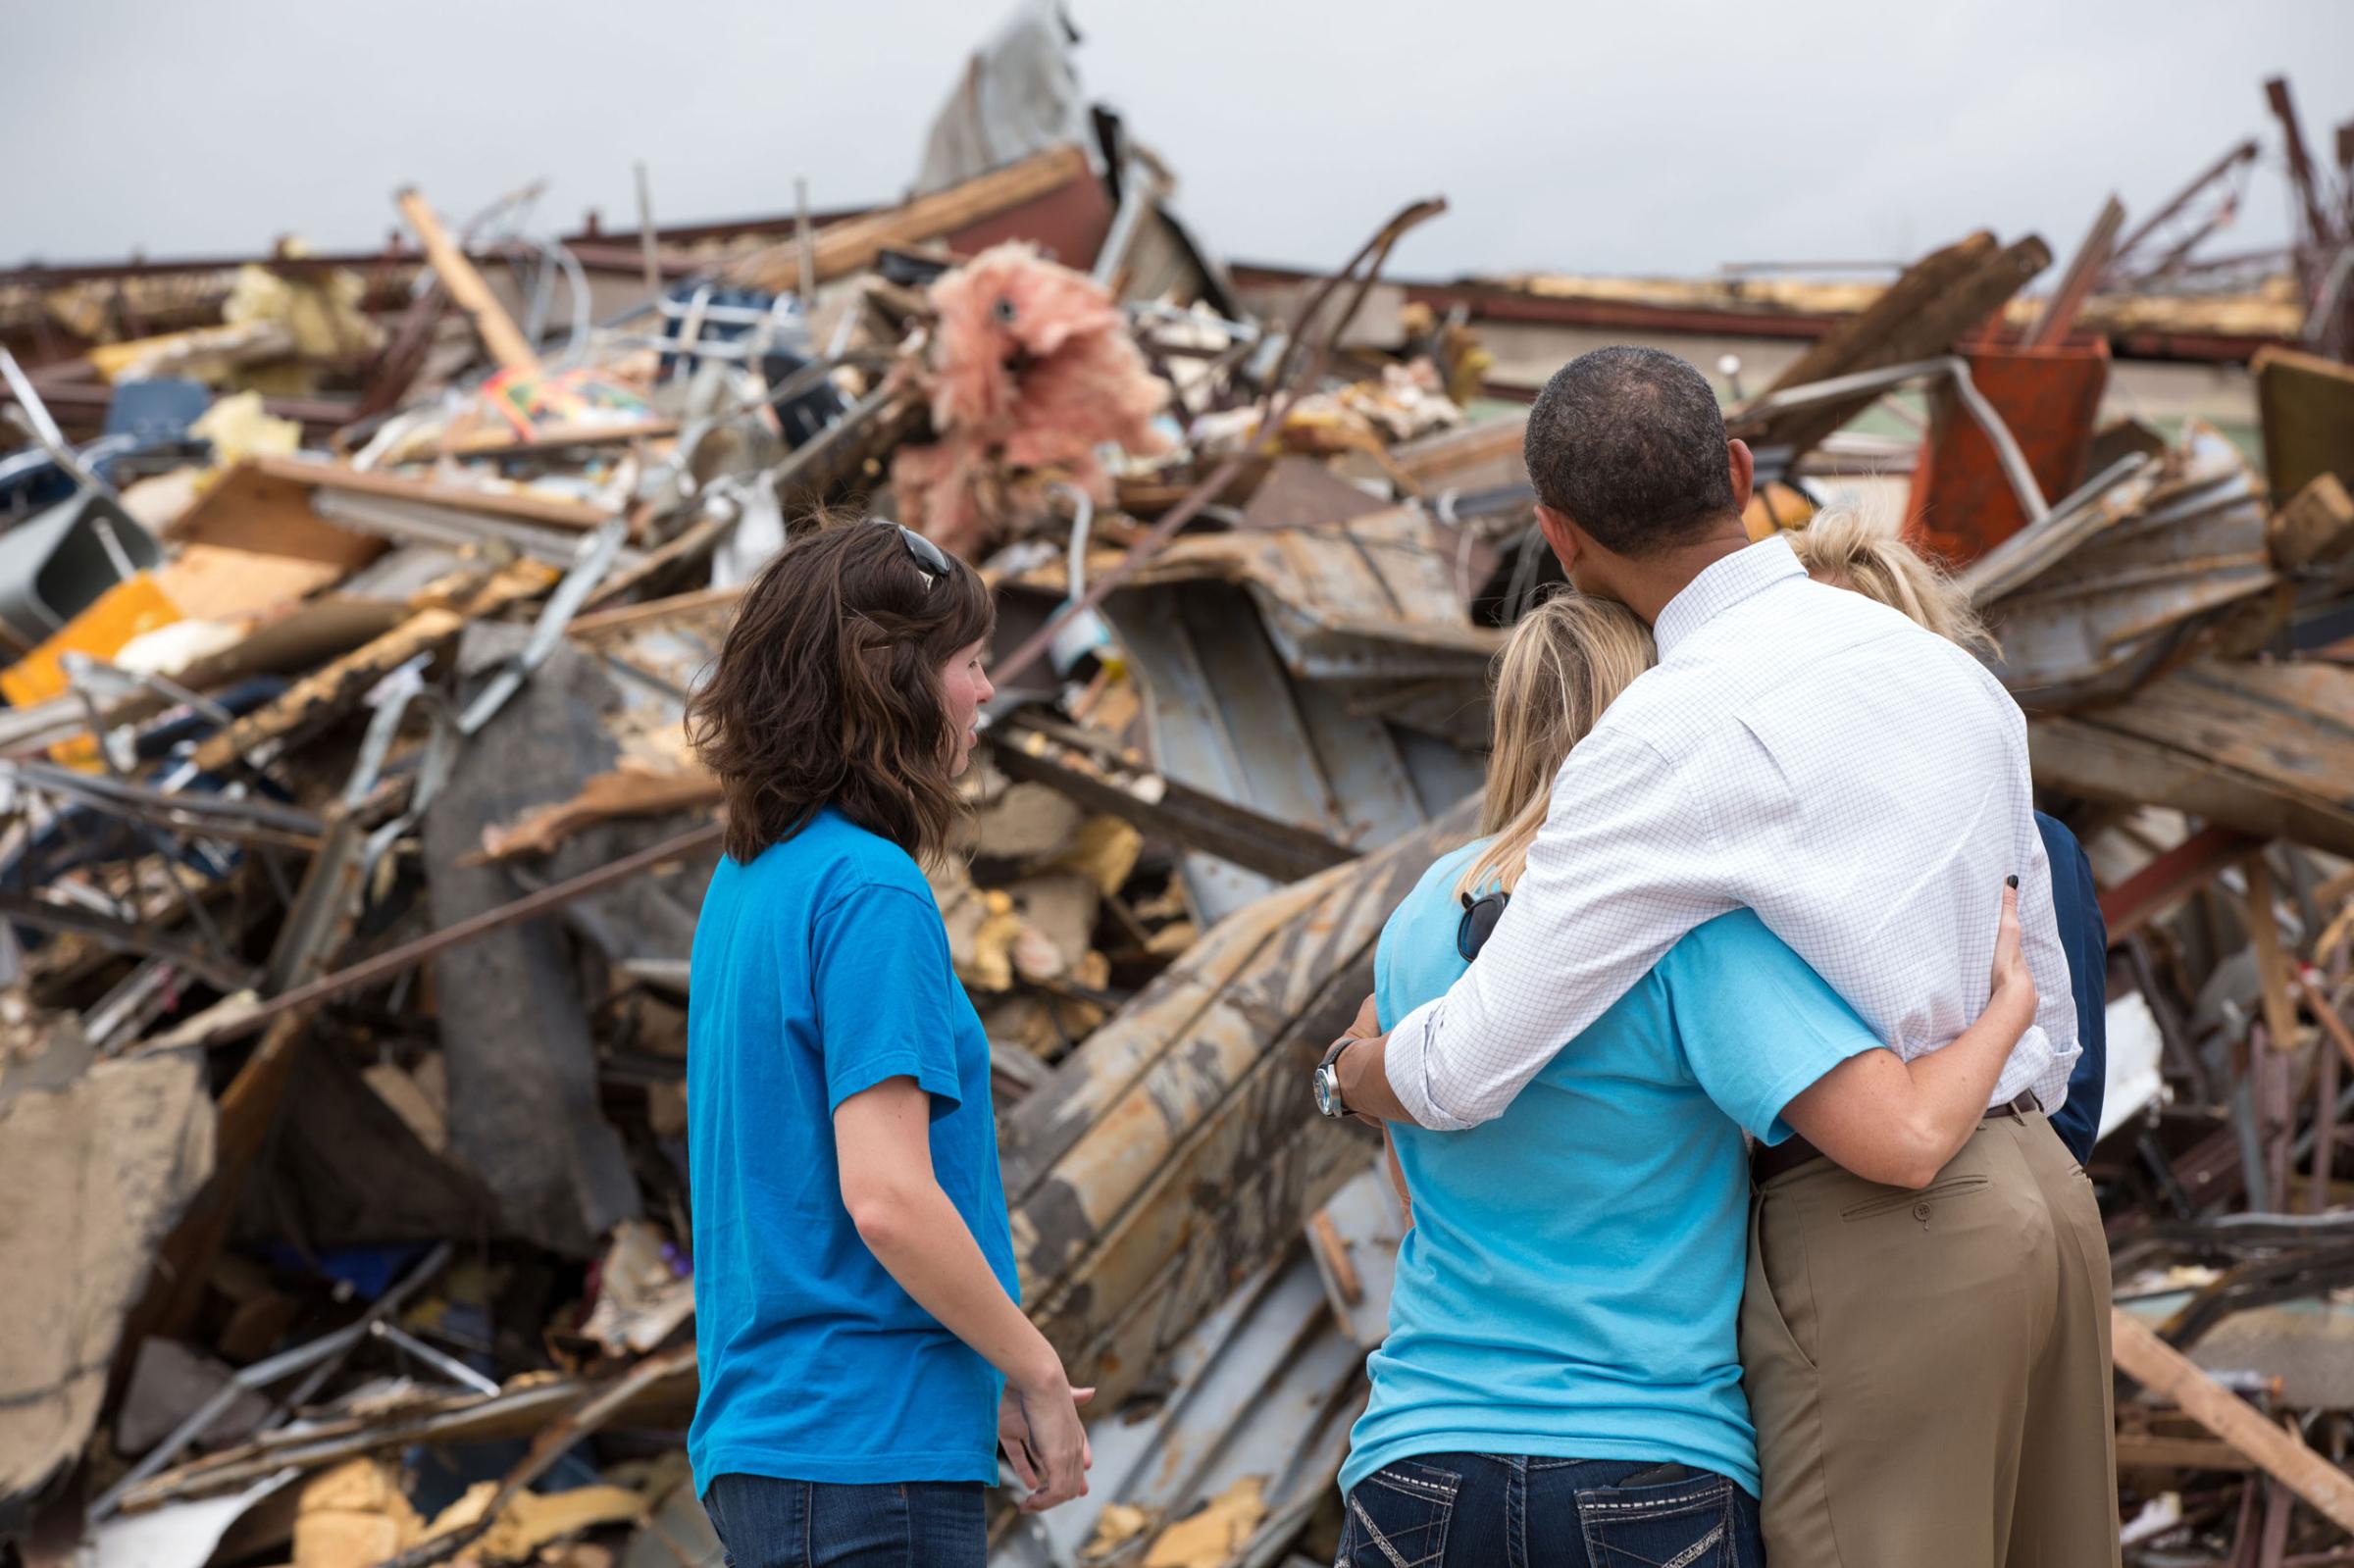 President Barack Obama hugs Amy Simpson, principal of Plaza Towers Elementary School, outside what remains of the school following a tornado in Moore, Okla., May 26, 2013.